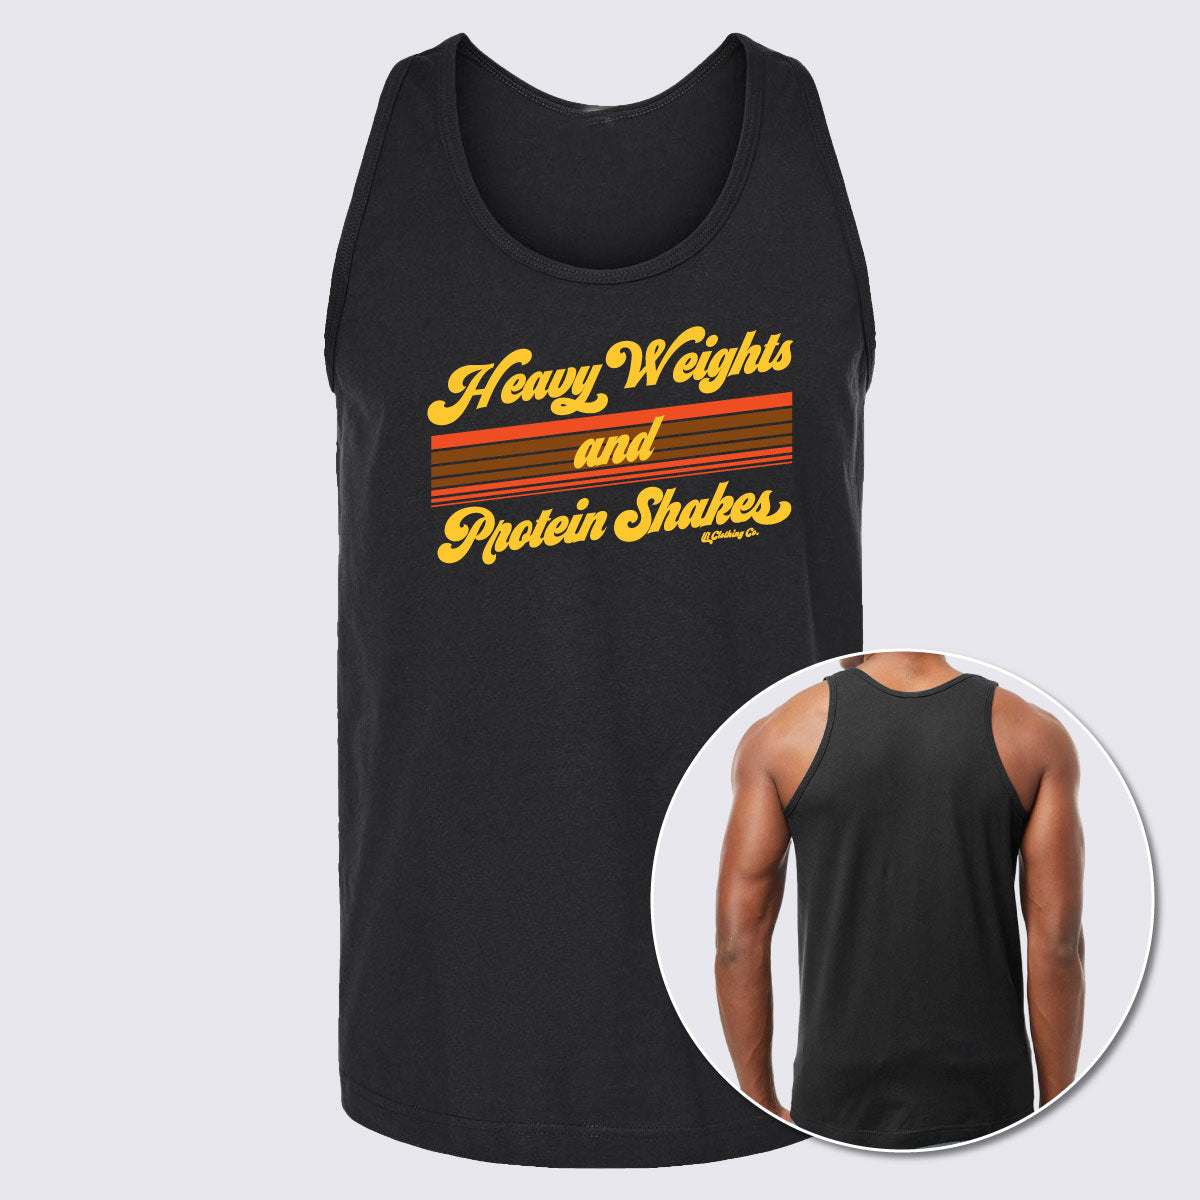 Heavy Weights &amp; Protein Shakes Unisex Fine Jersey Tank Top